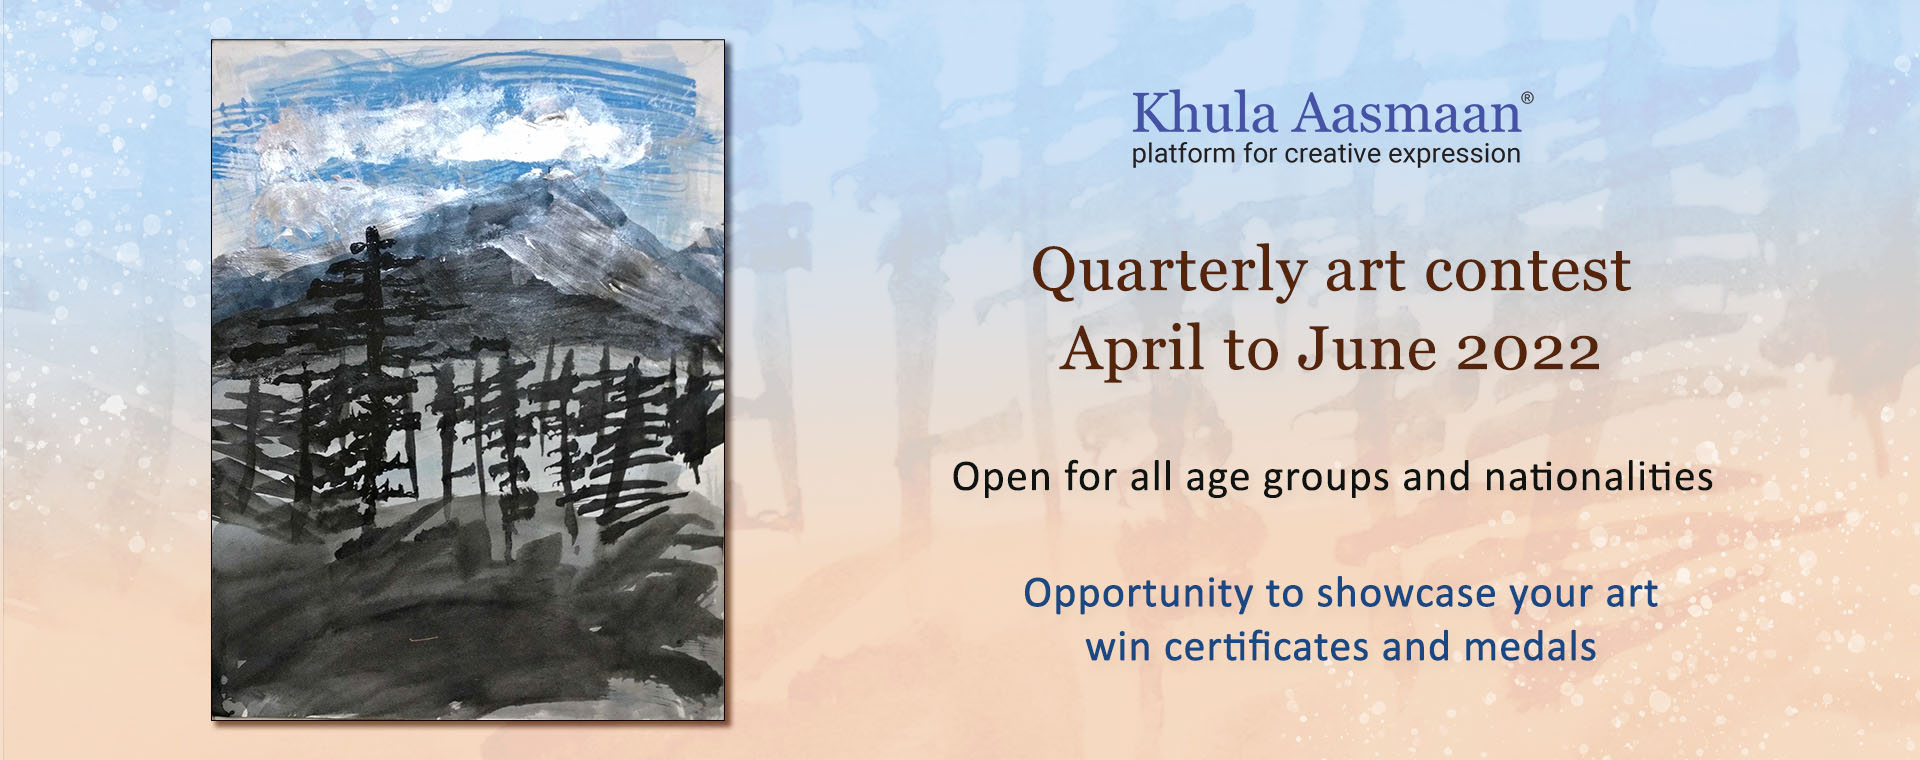 Participate in Khula Aasmaan quarterly art contest